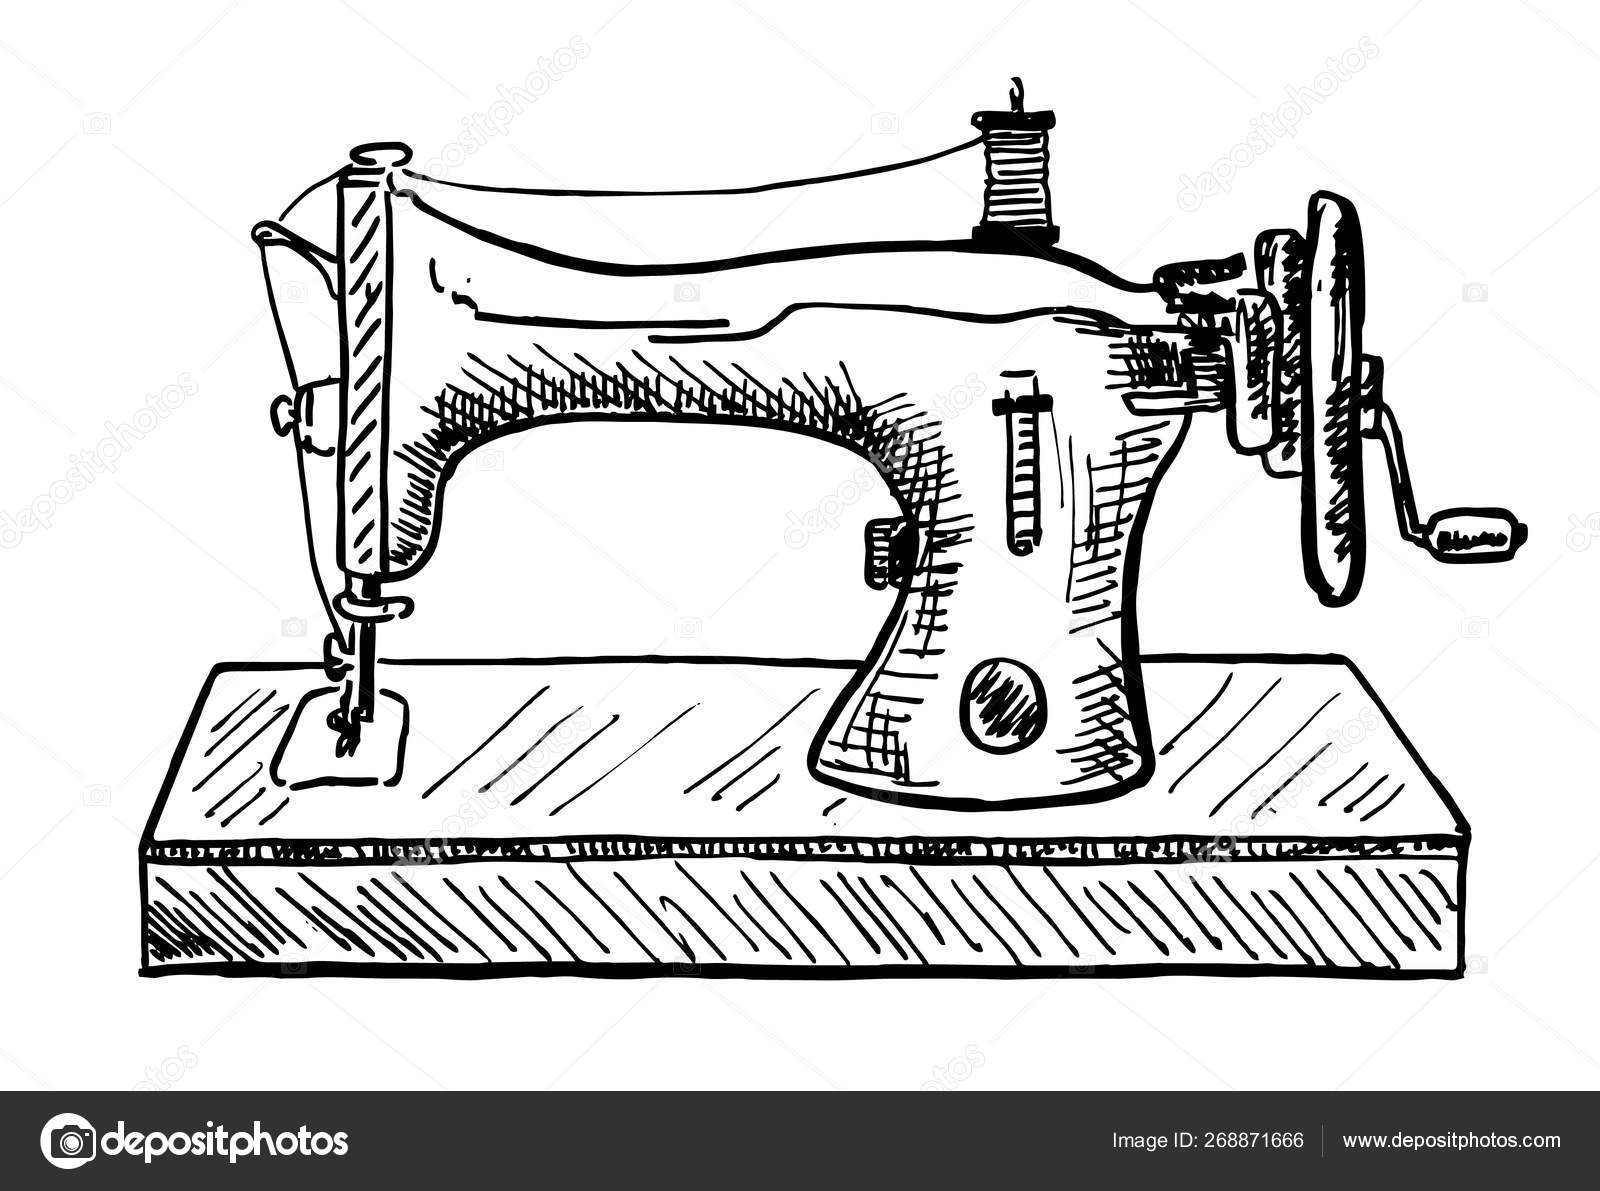 Sewing Machine Vector Drawing Stock Vector  Illustration of icon  garment 115089798